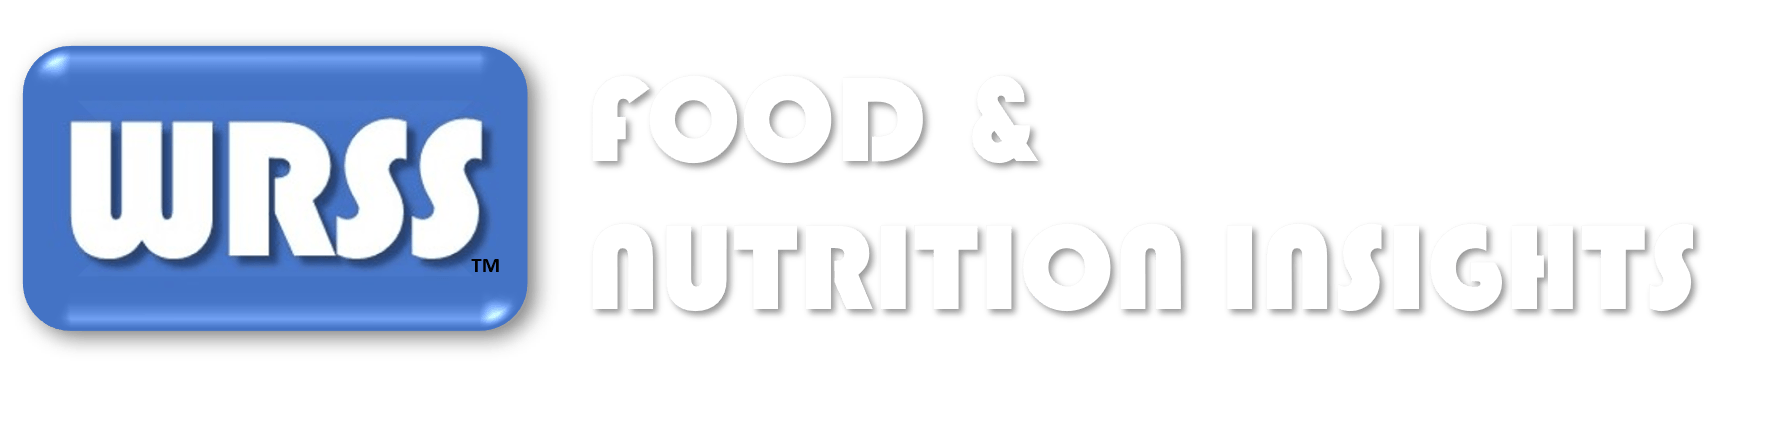 Food & Nutrition Insights